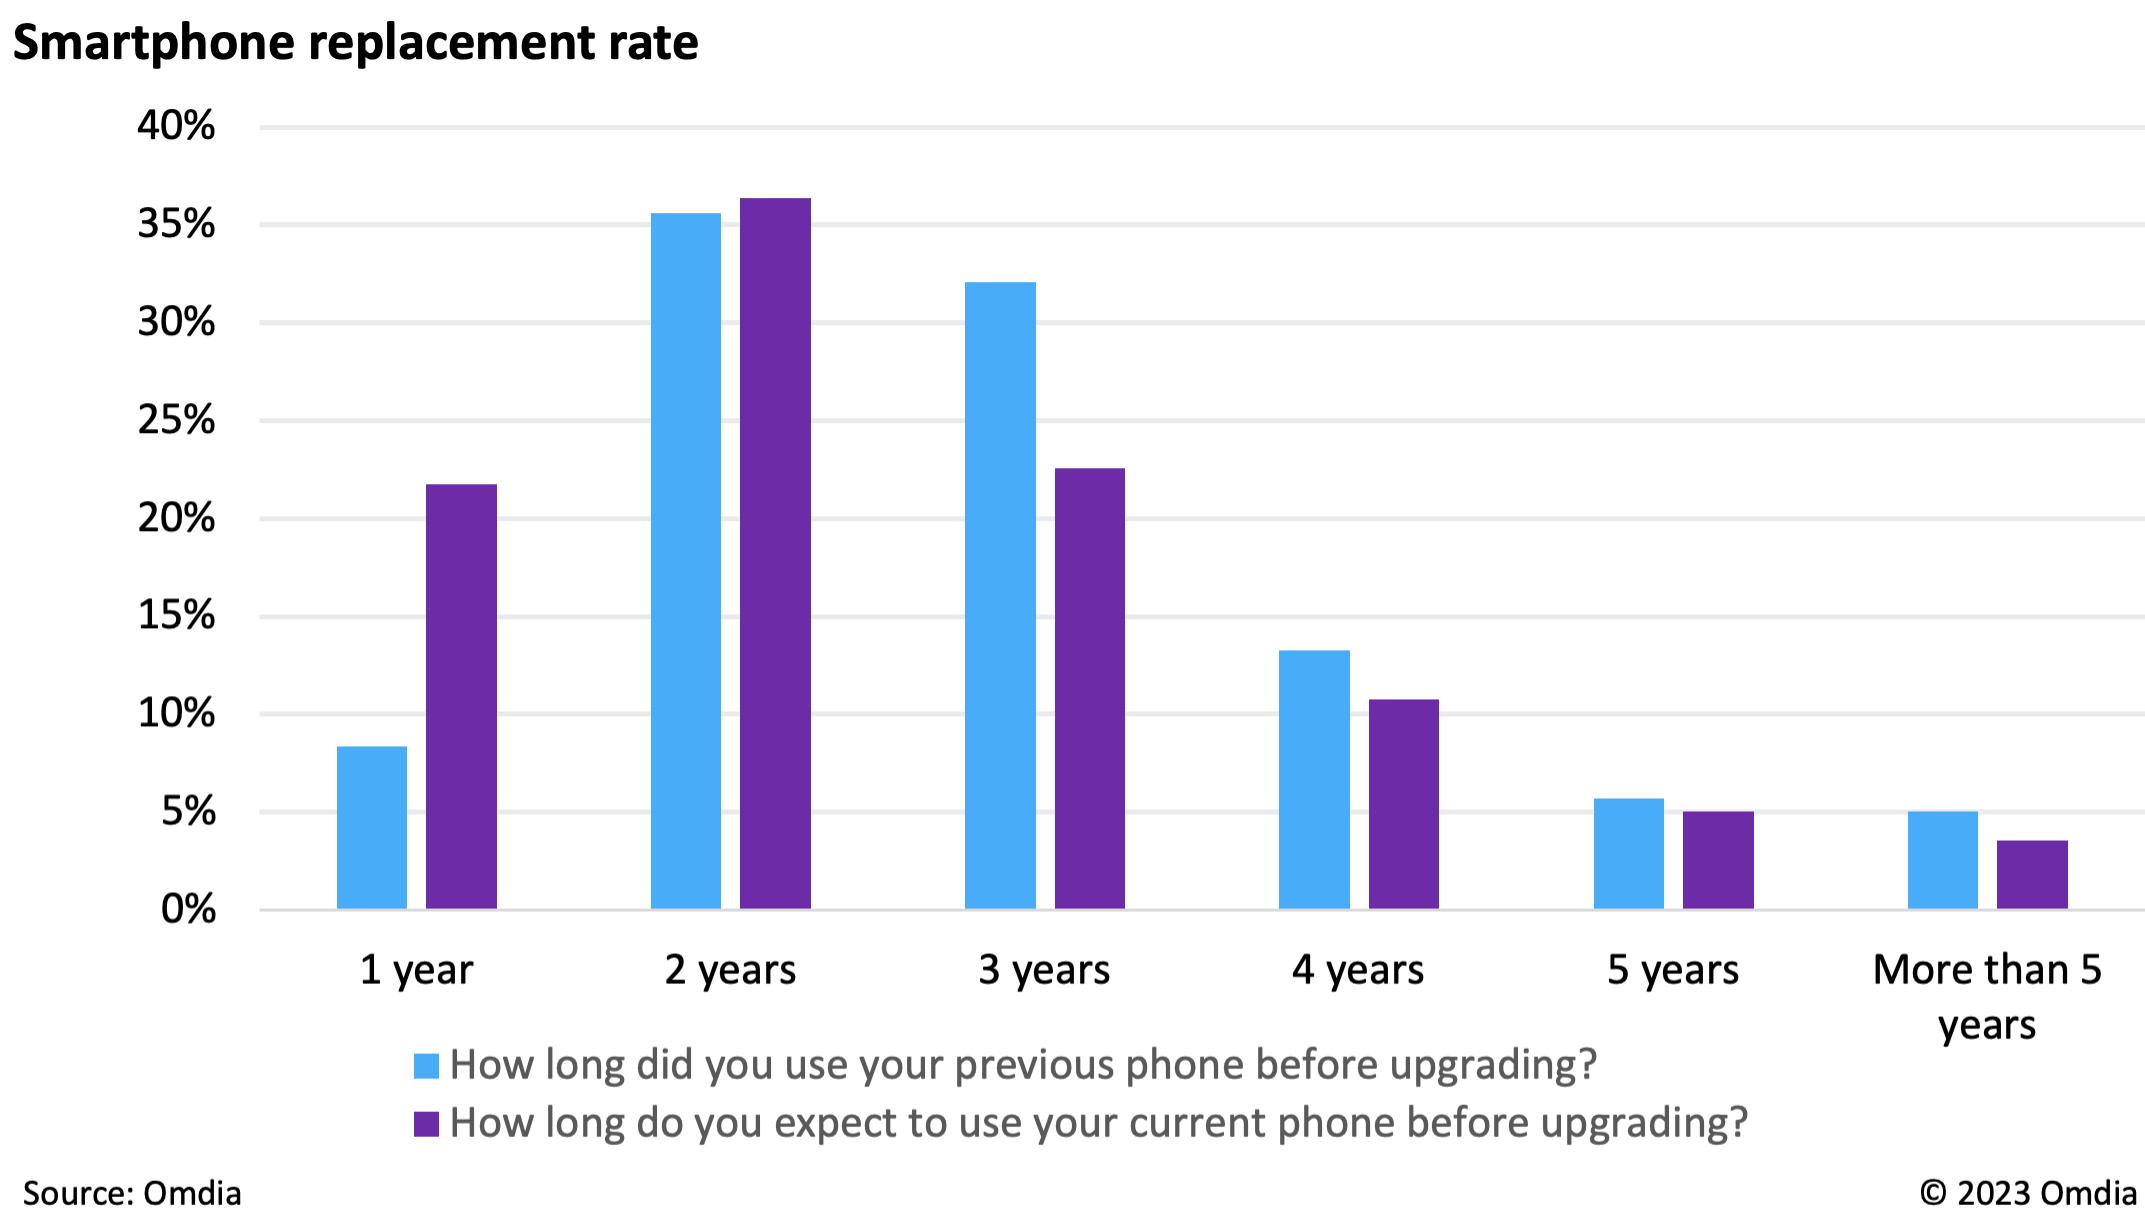 A graph shows smartphone replacement timing peaking at 2 years then tapering rate; peak is at three years